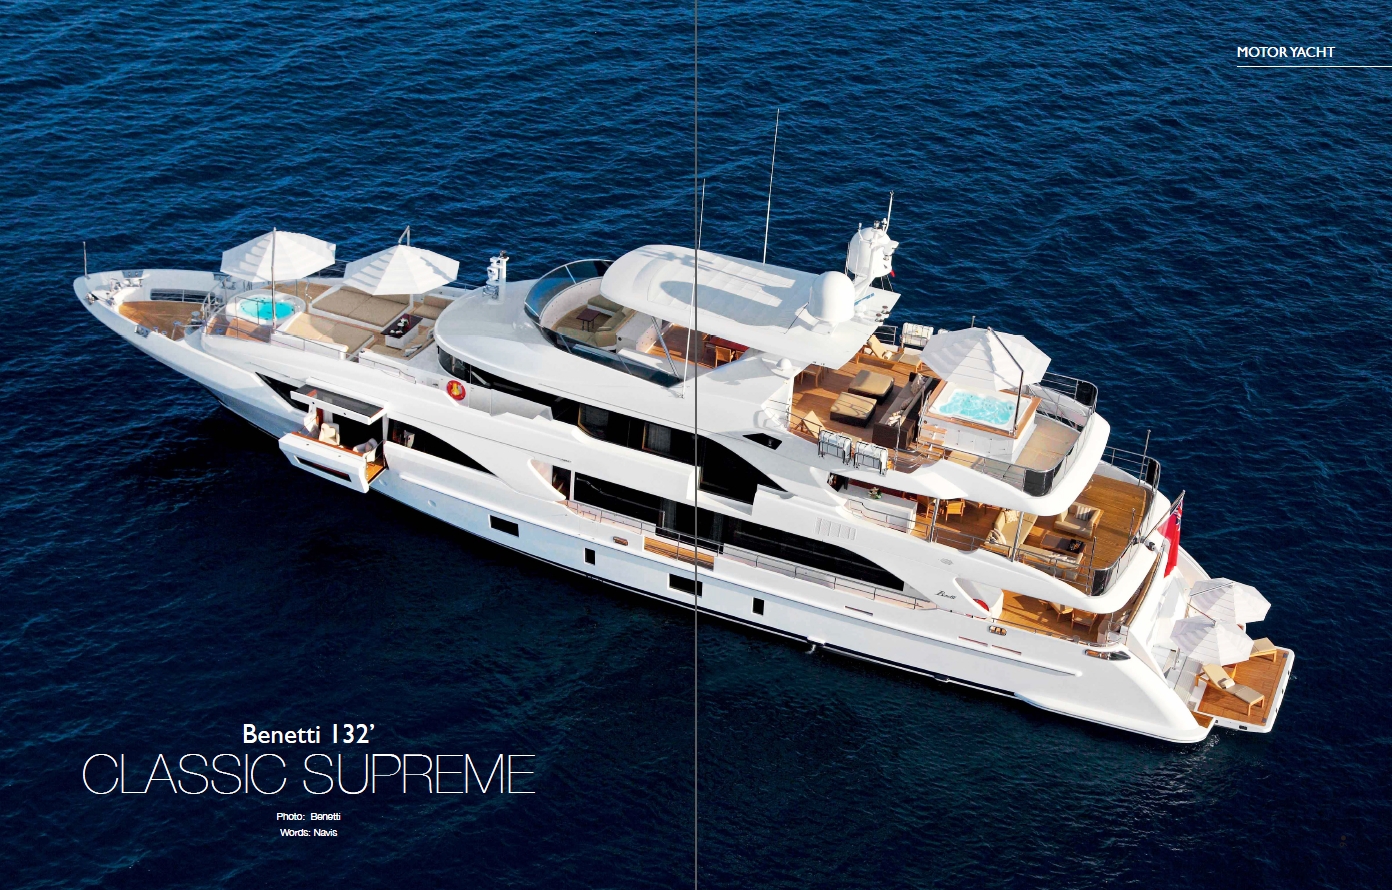 The Benetti Classic Supreme 132, the result of collaborative efforts in design and functionality